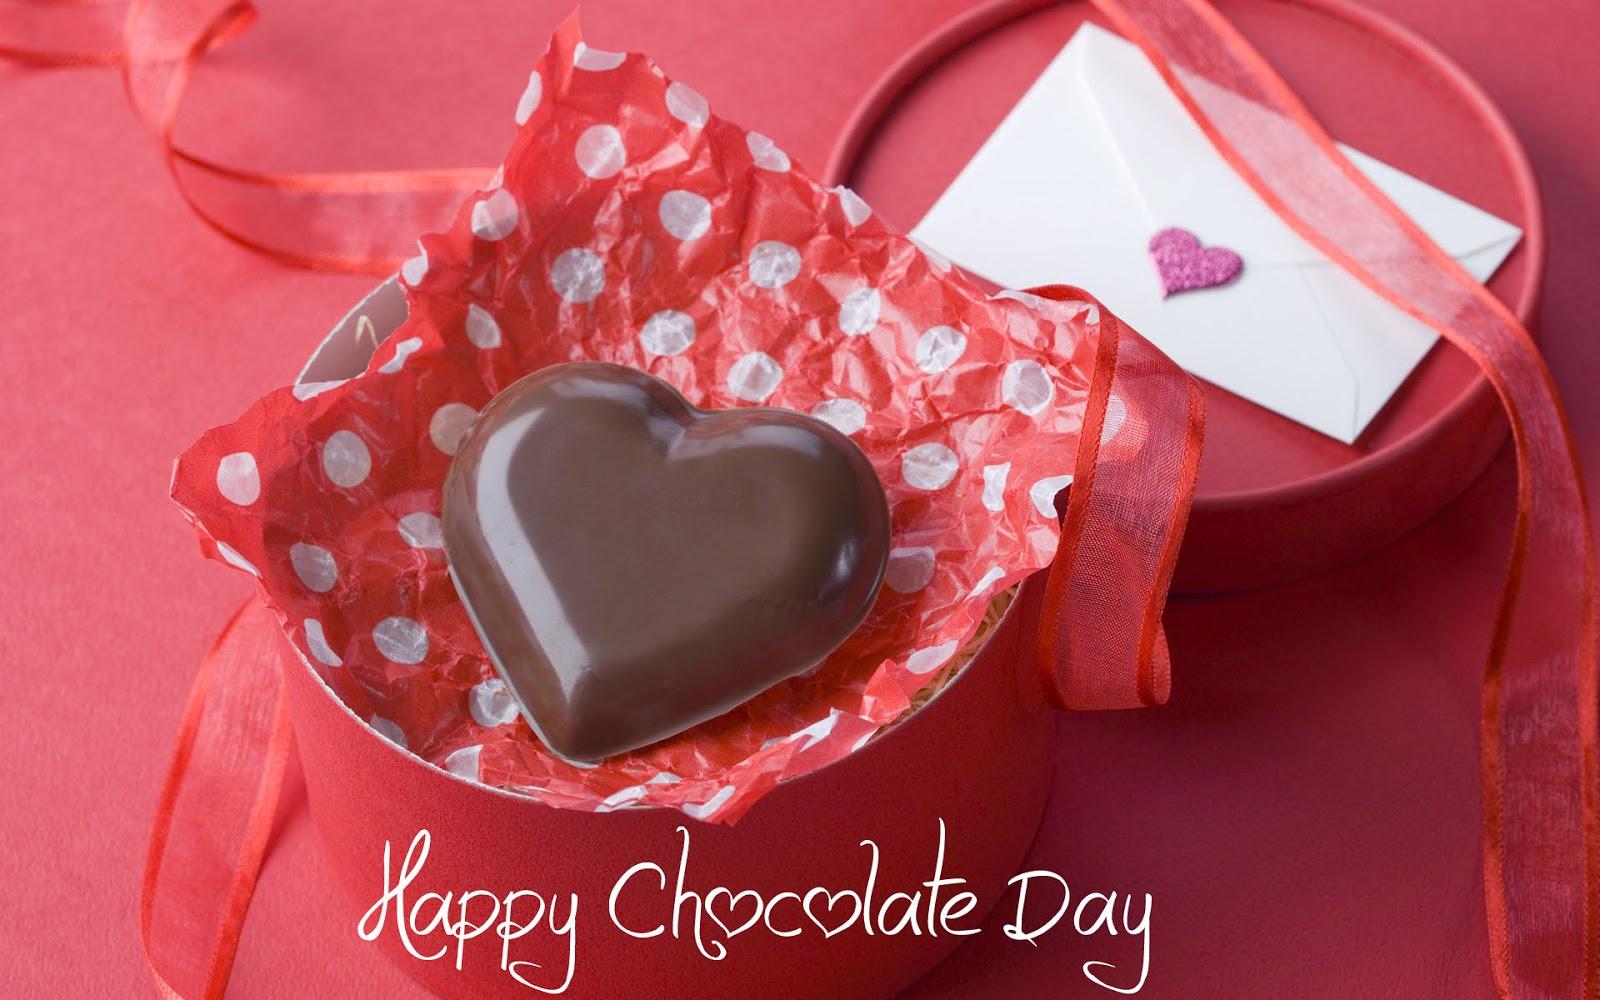 Chocolate Day Image for Whatsapp DP, Profile Wallpaper